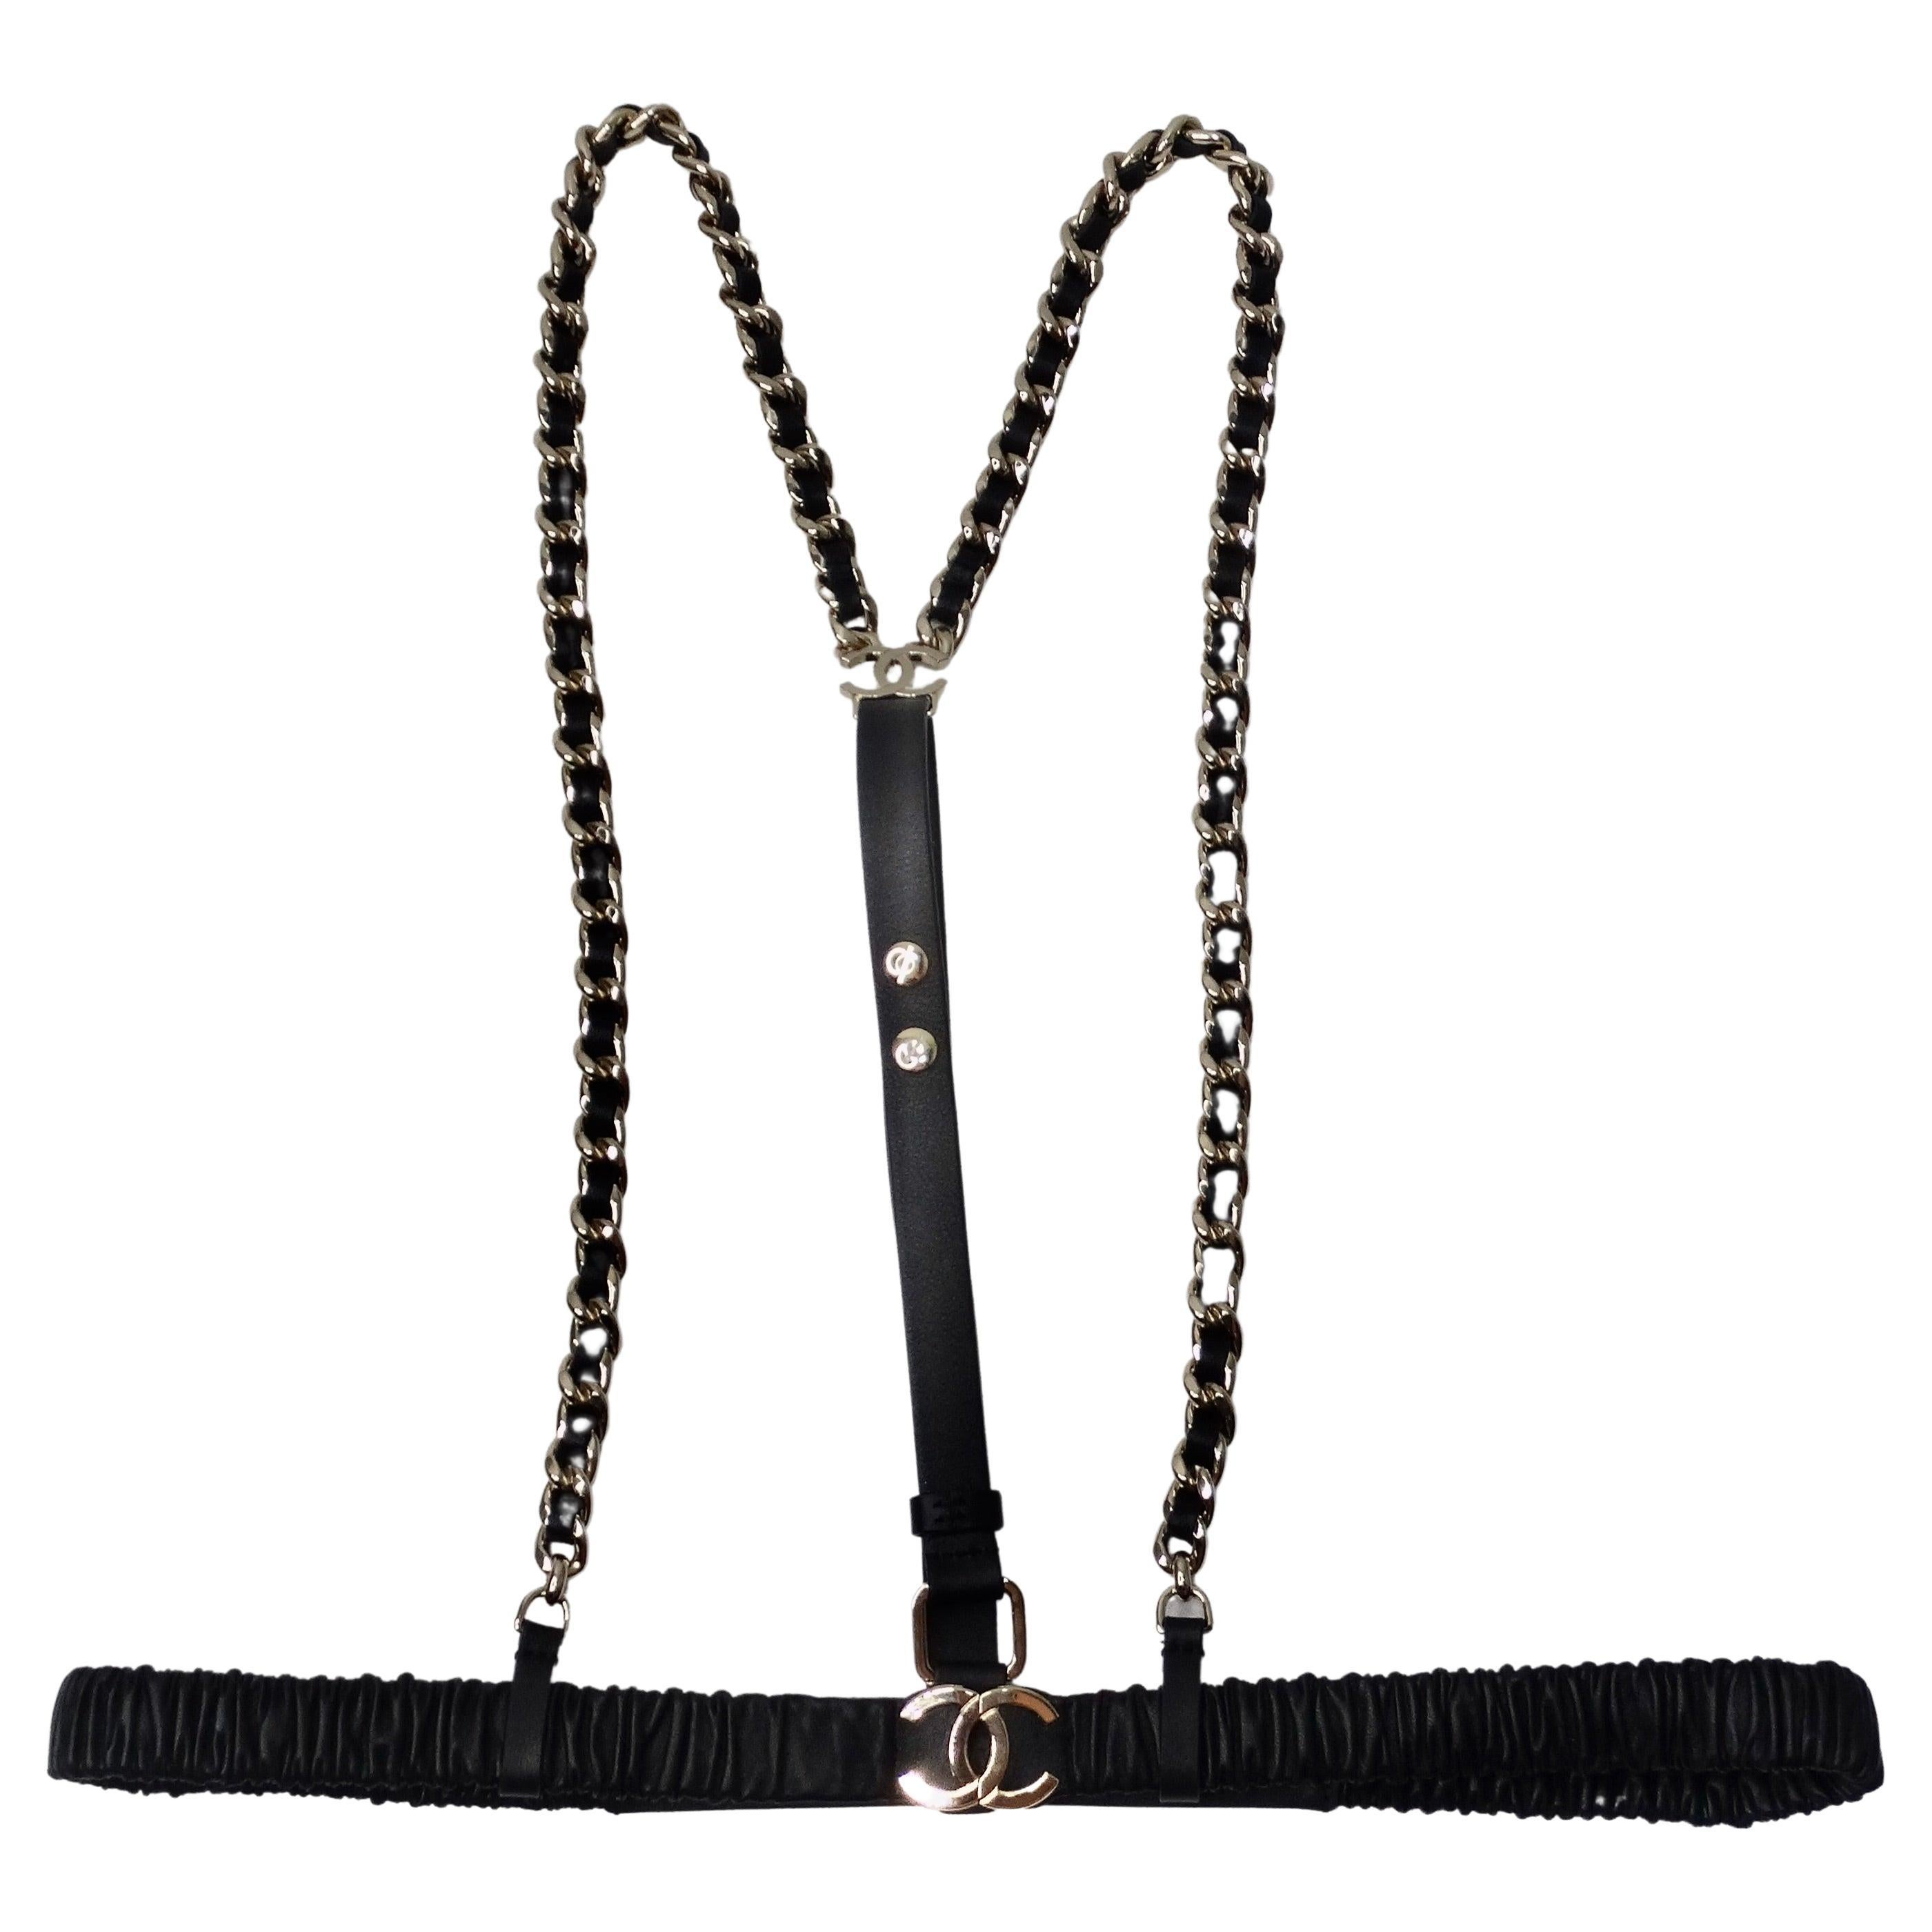 Chanel FW 2021/2022 Harness For Sale